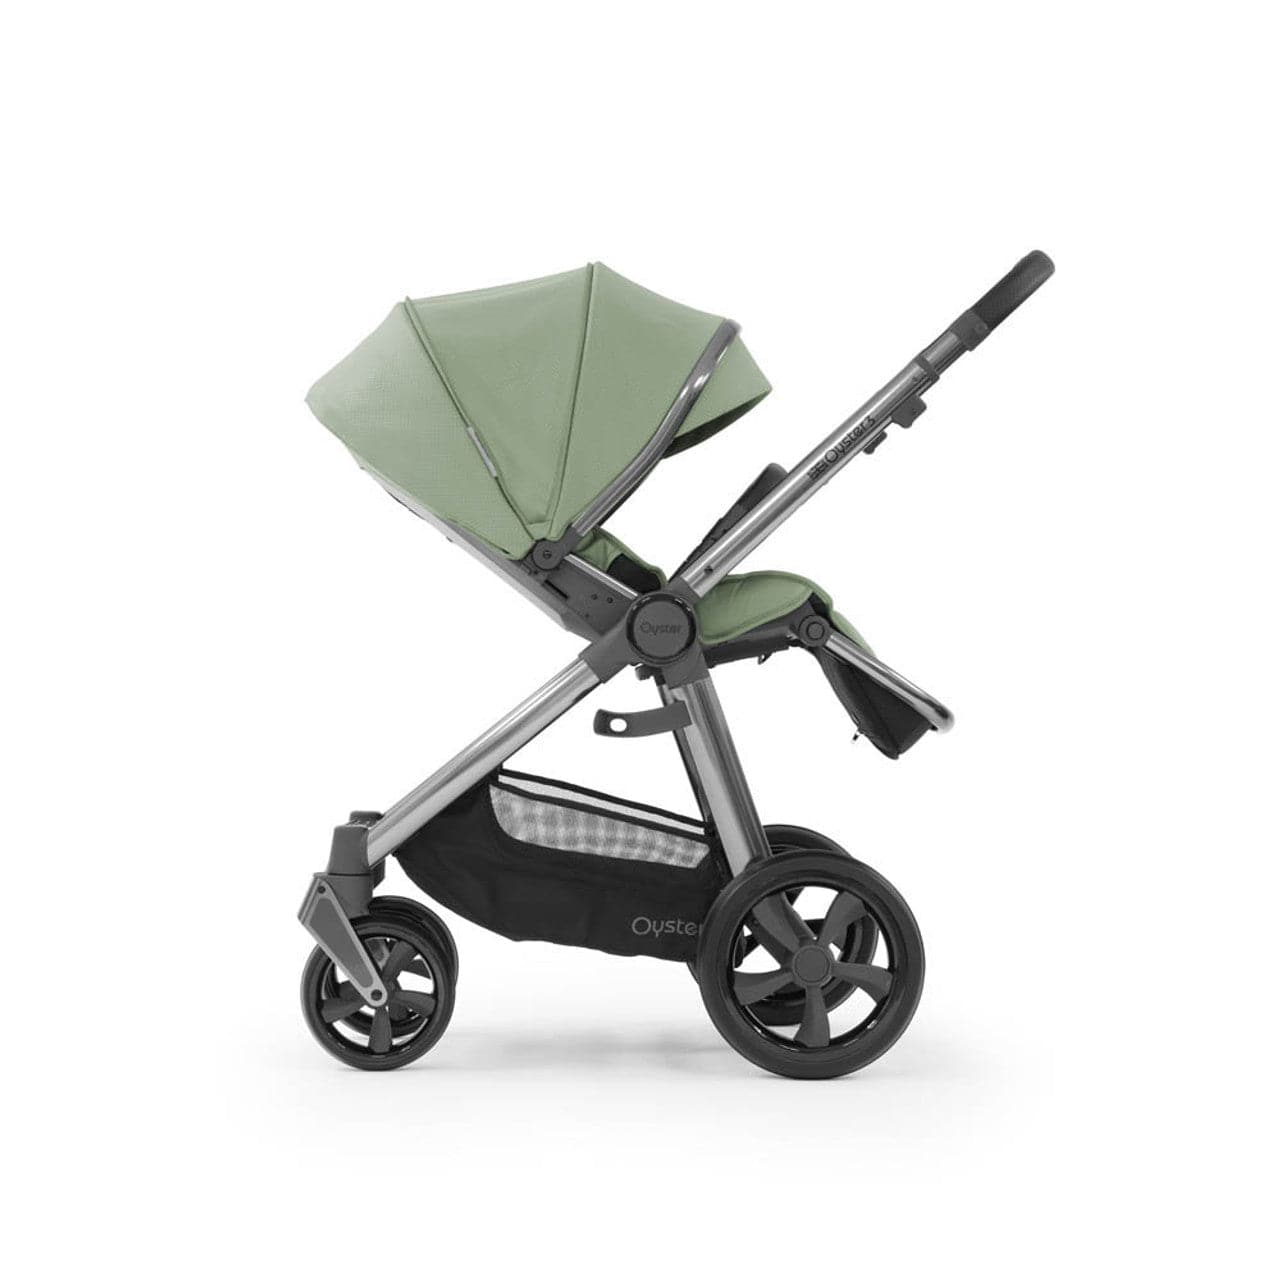 Babystyle Oyster 3 Essential 5 Piece Travel System Bundle - Spearmint -  | For Your Little One